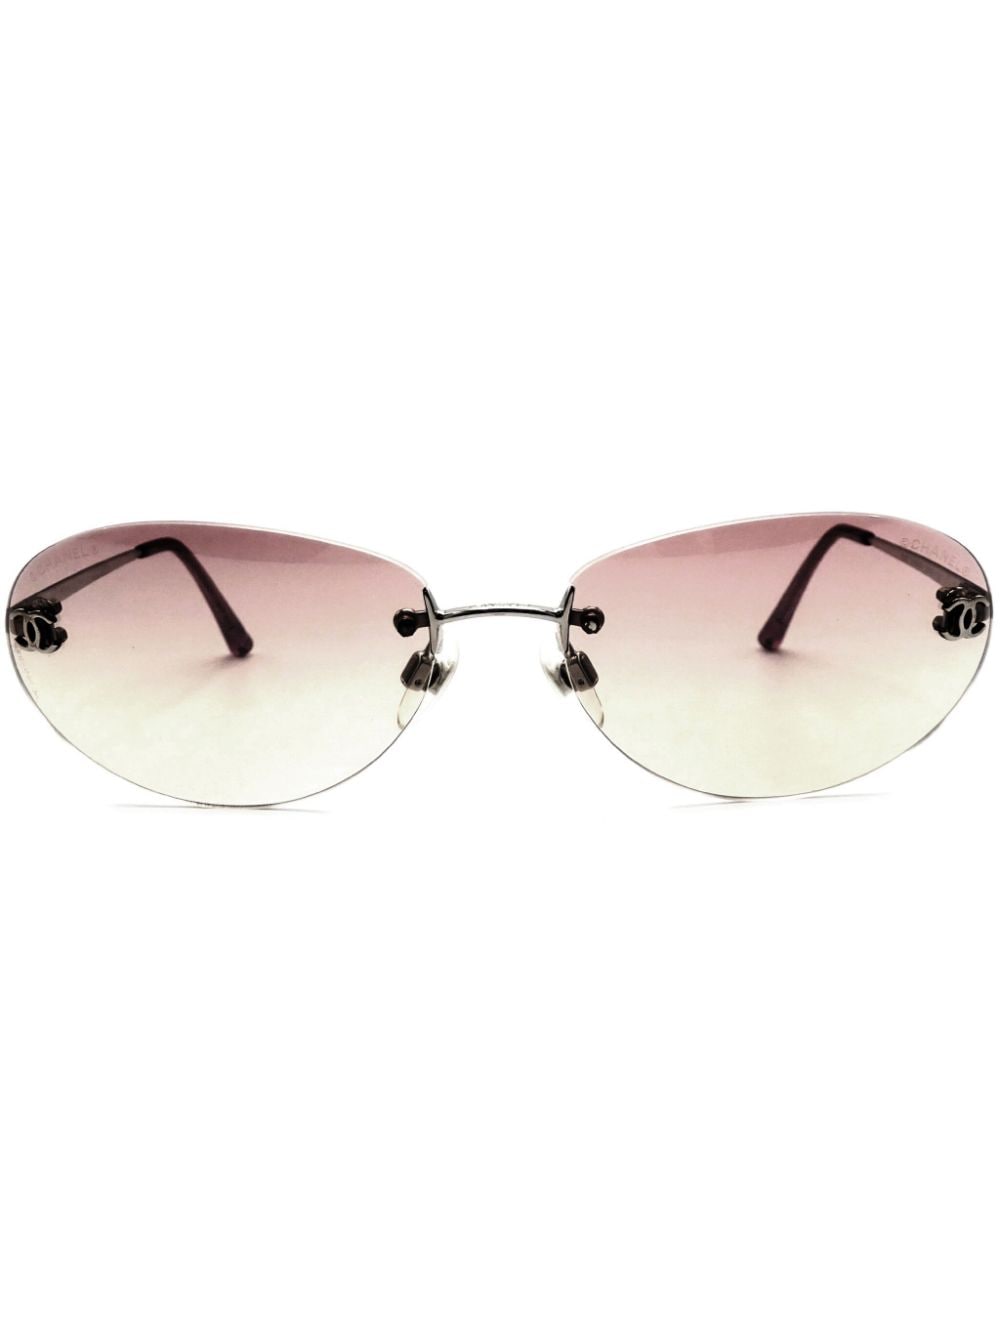 Pre-owned Chanel 1990-2000s Cc Rimless Sunglasses